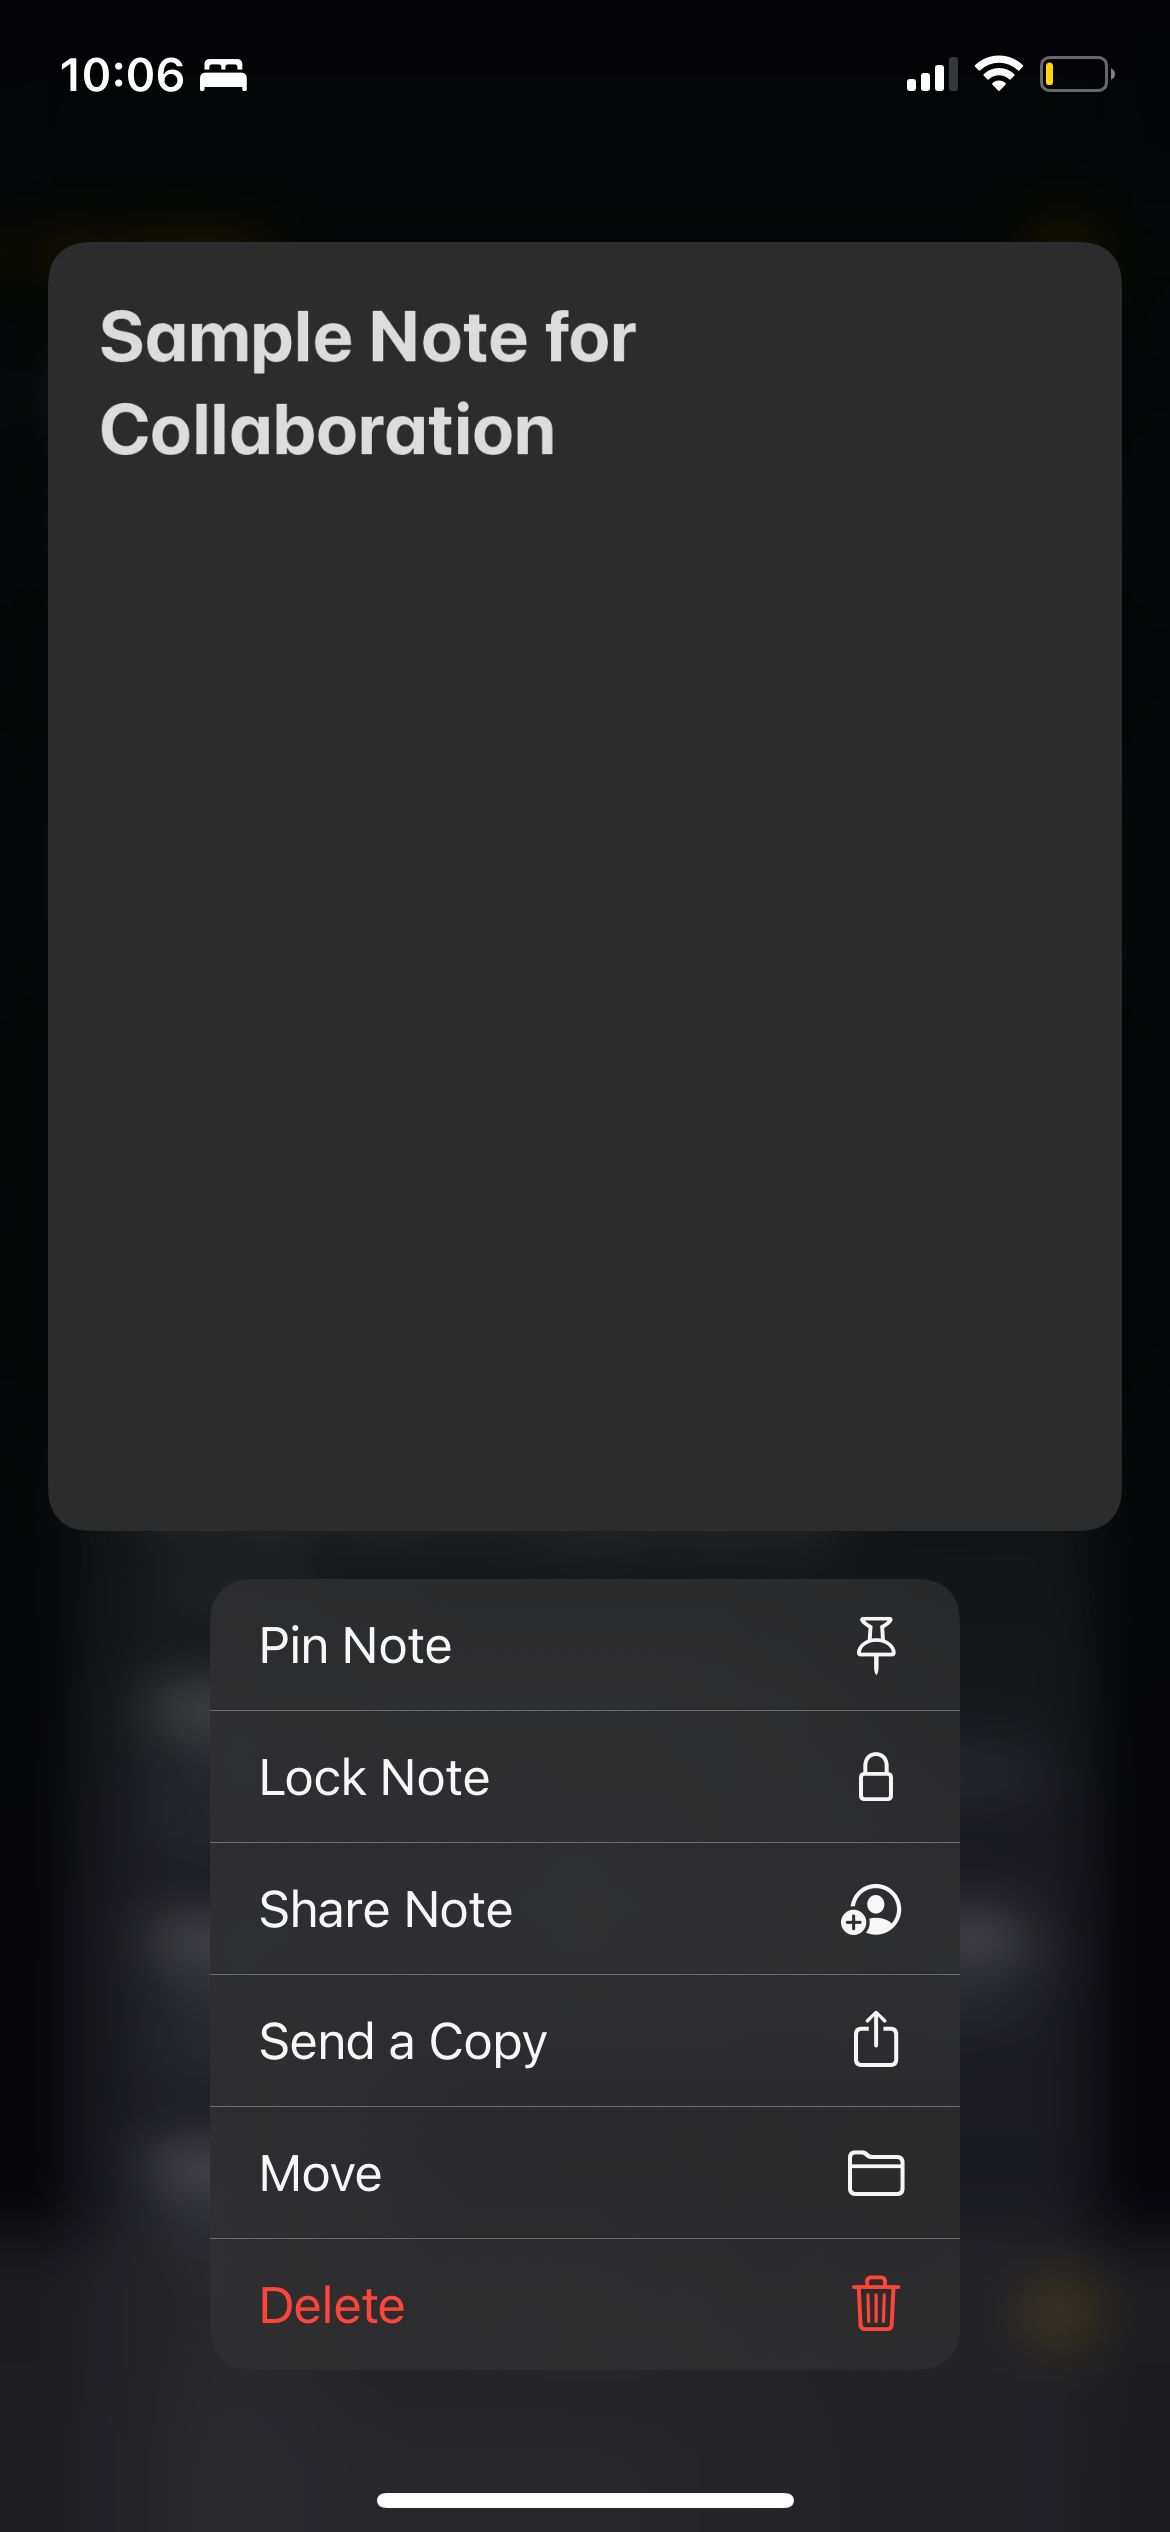 Share Note Option from Long-pressing a Note on List View